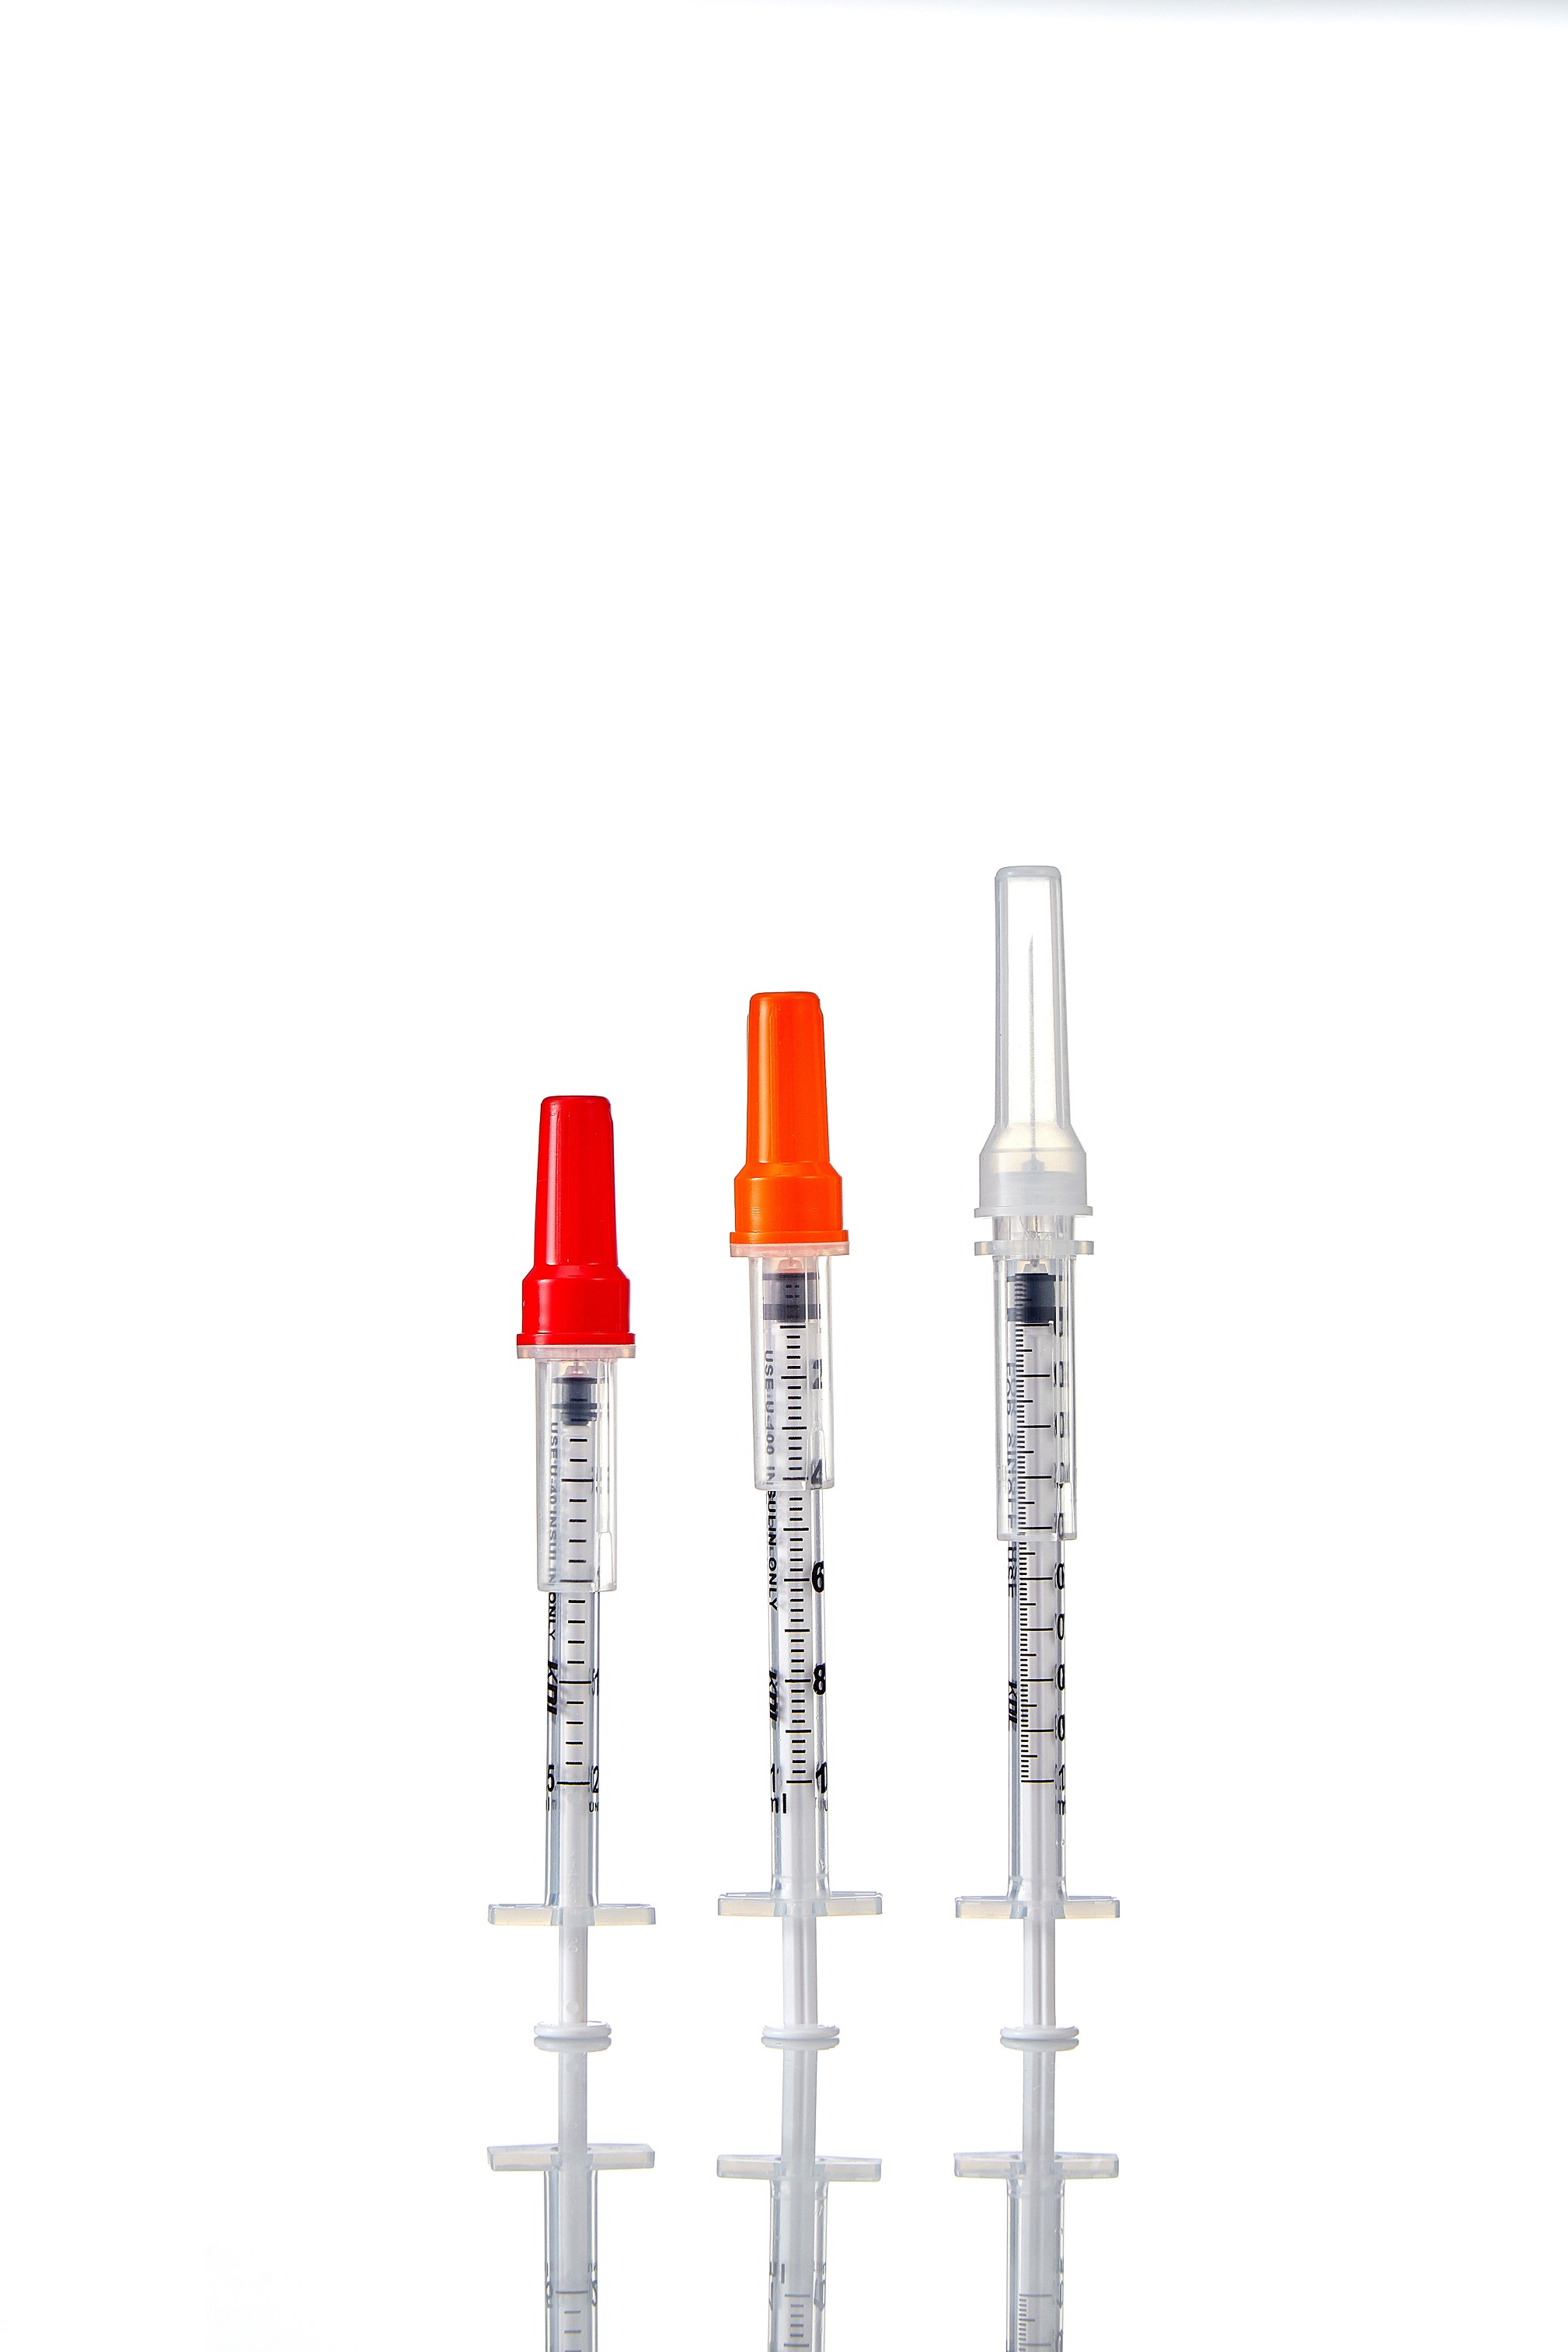 Safety retractable Insulin syringe